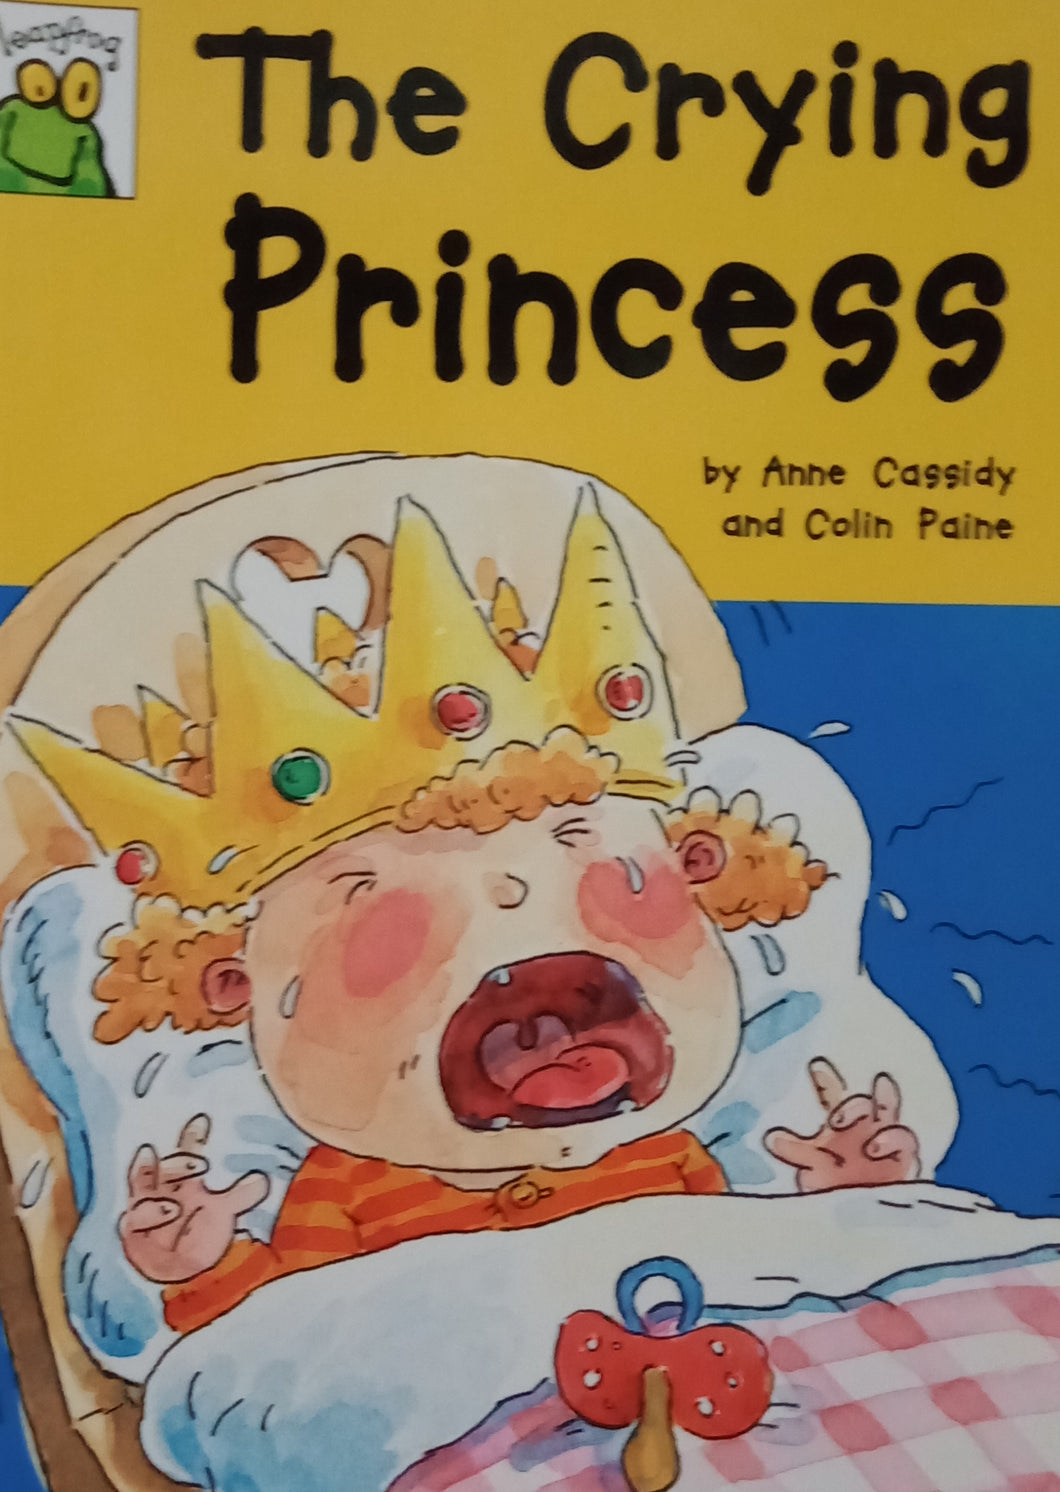 The Crying Princess by Anne Cassidy